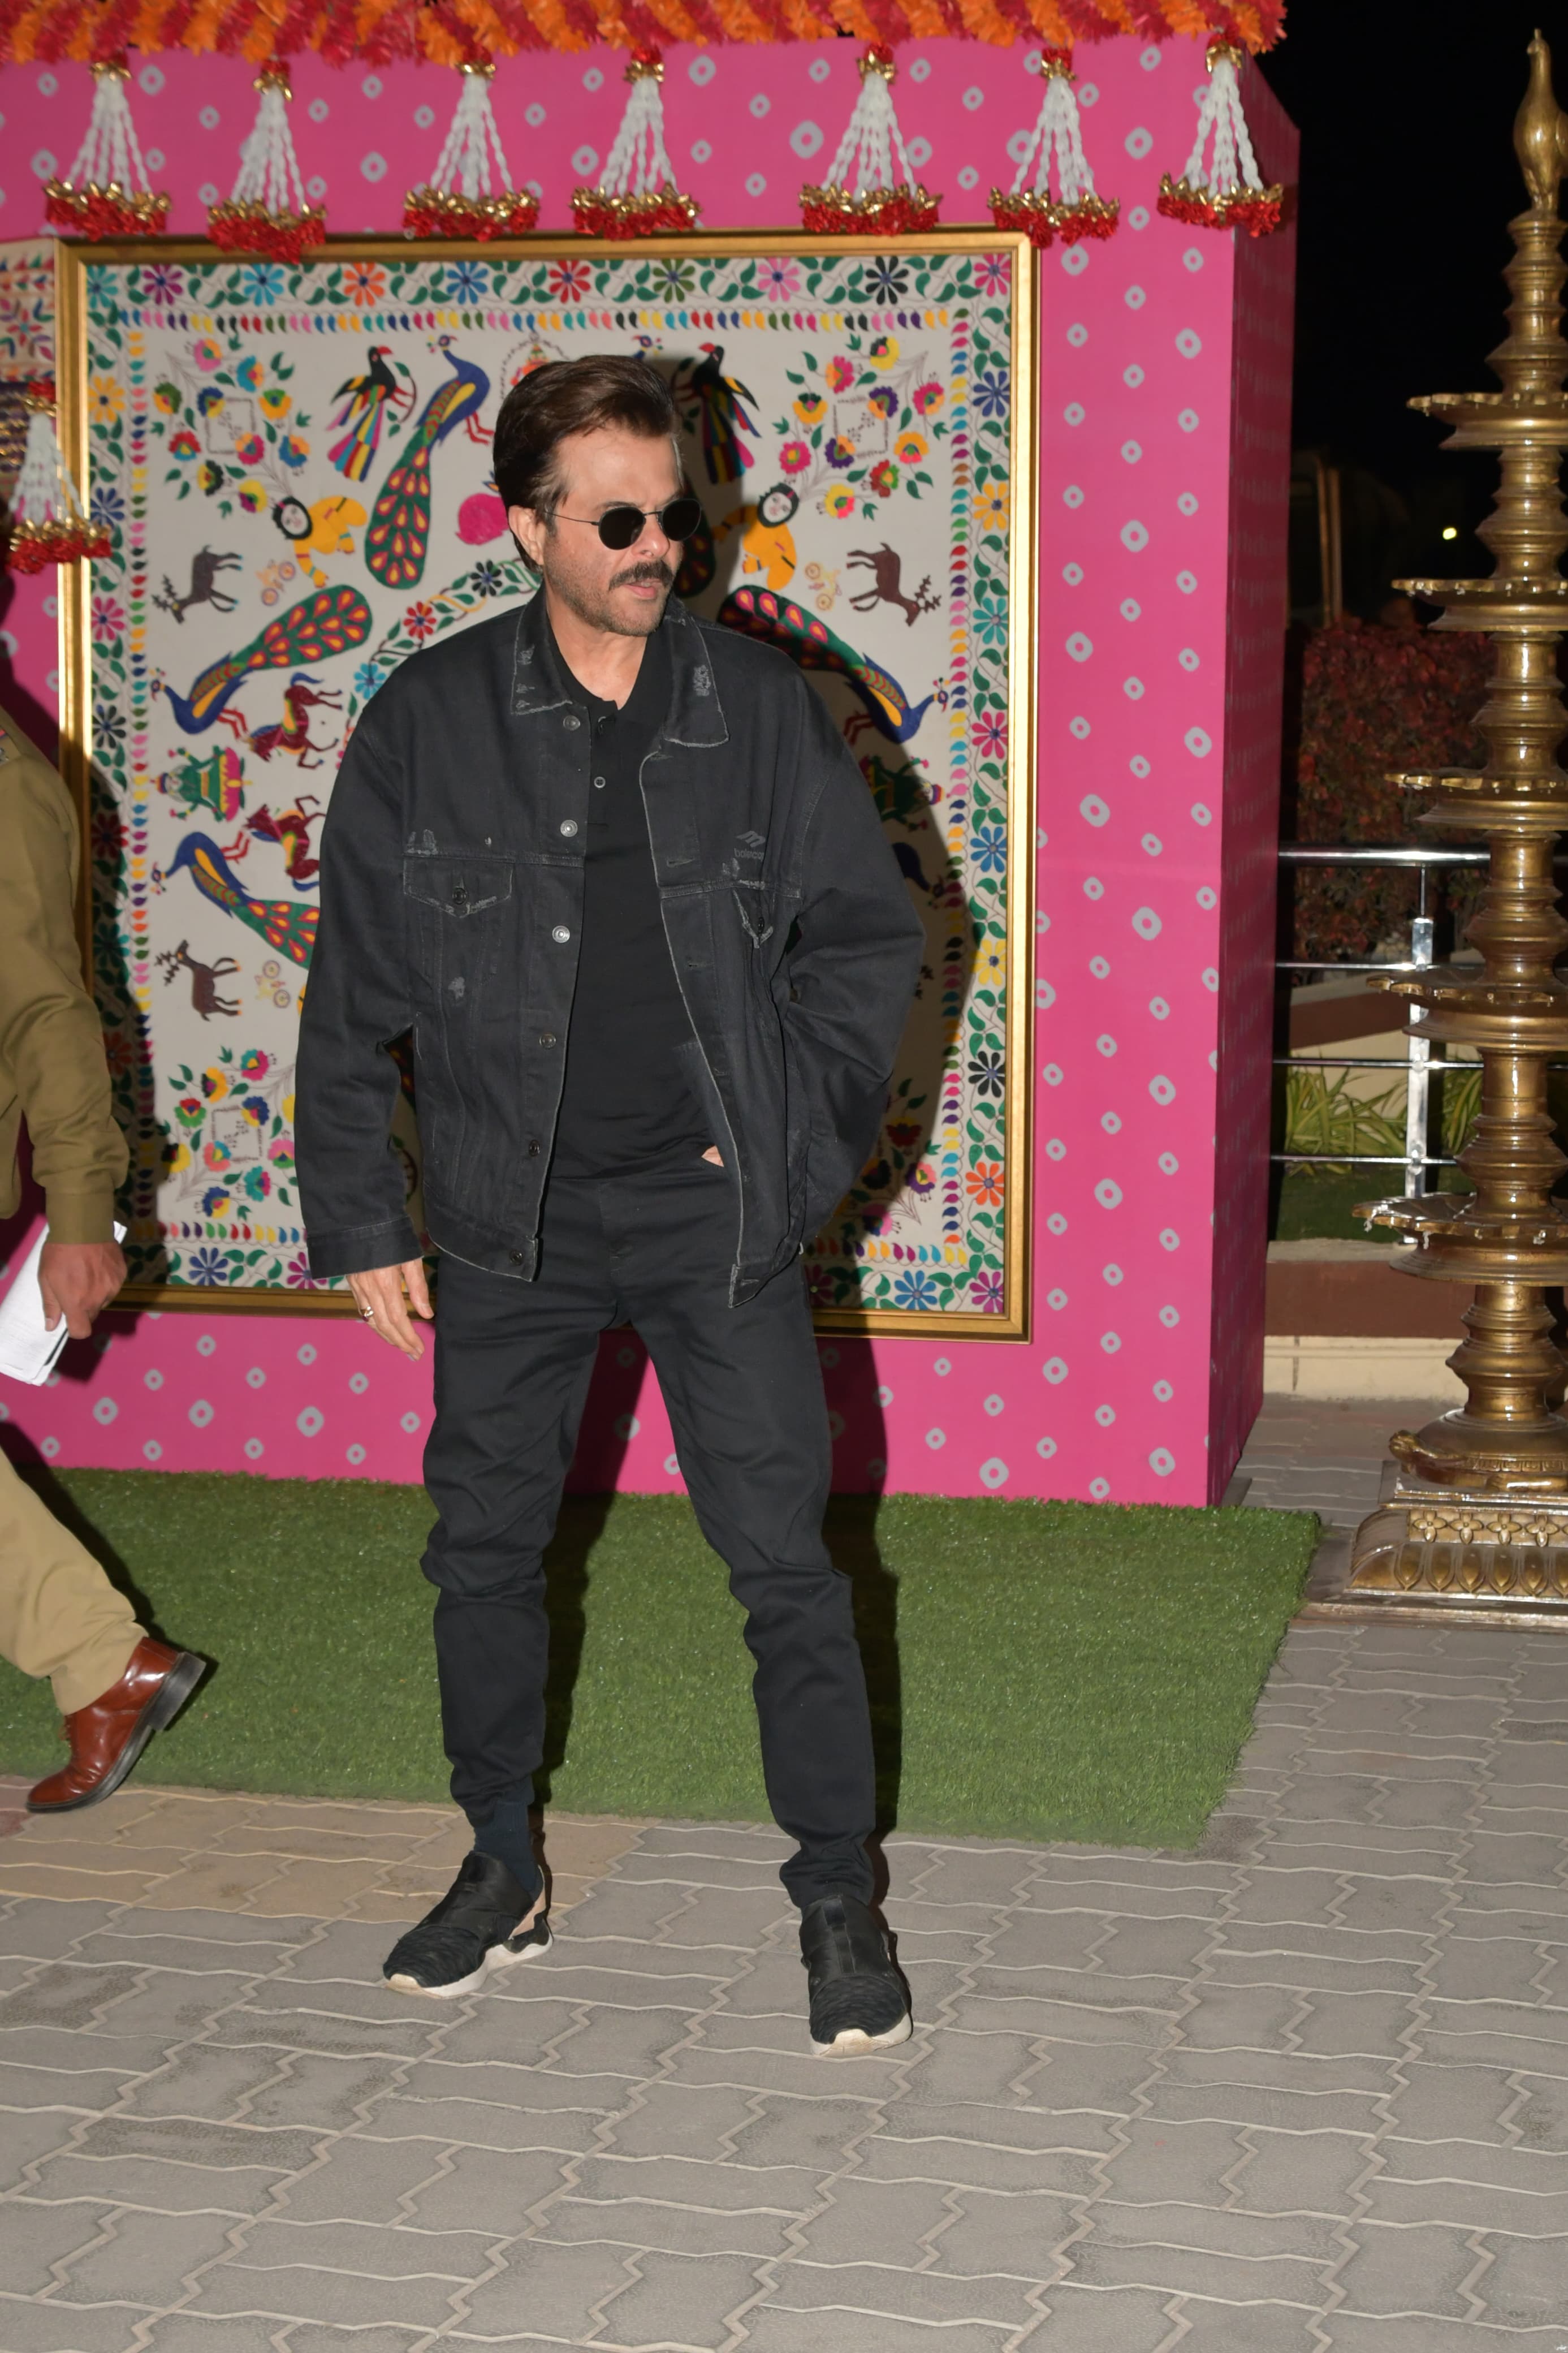 Anil Kapoor was among the stars who attended the Ambanis' grand function